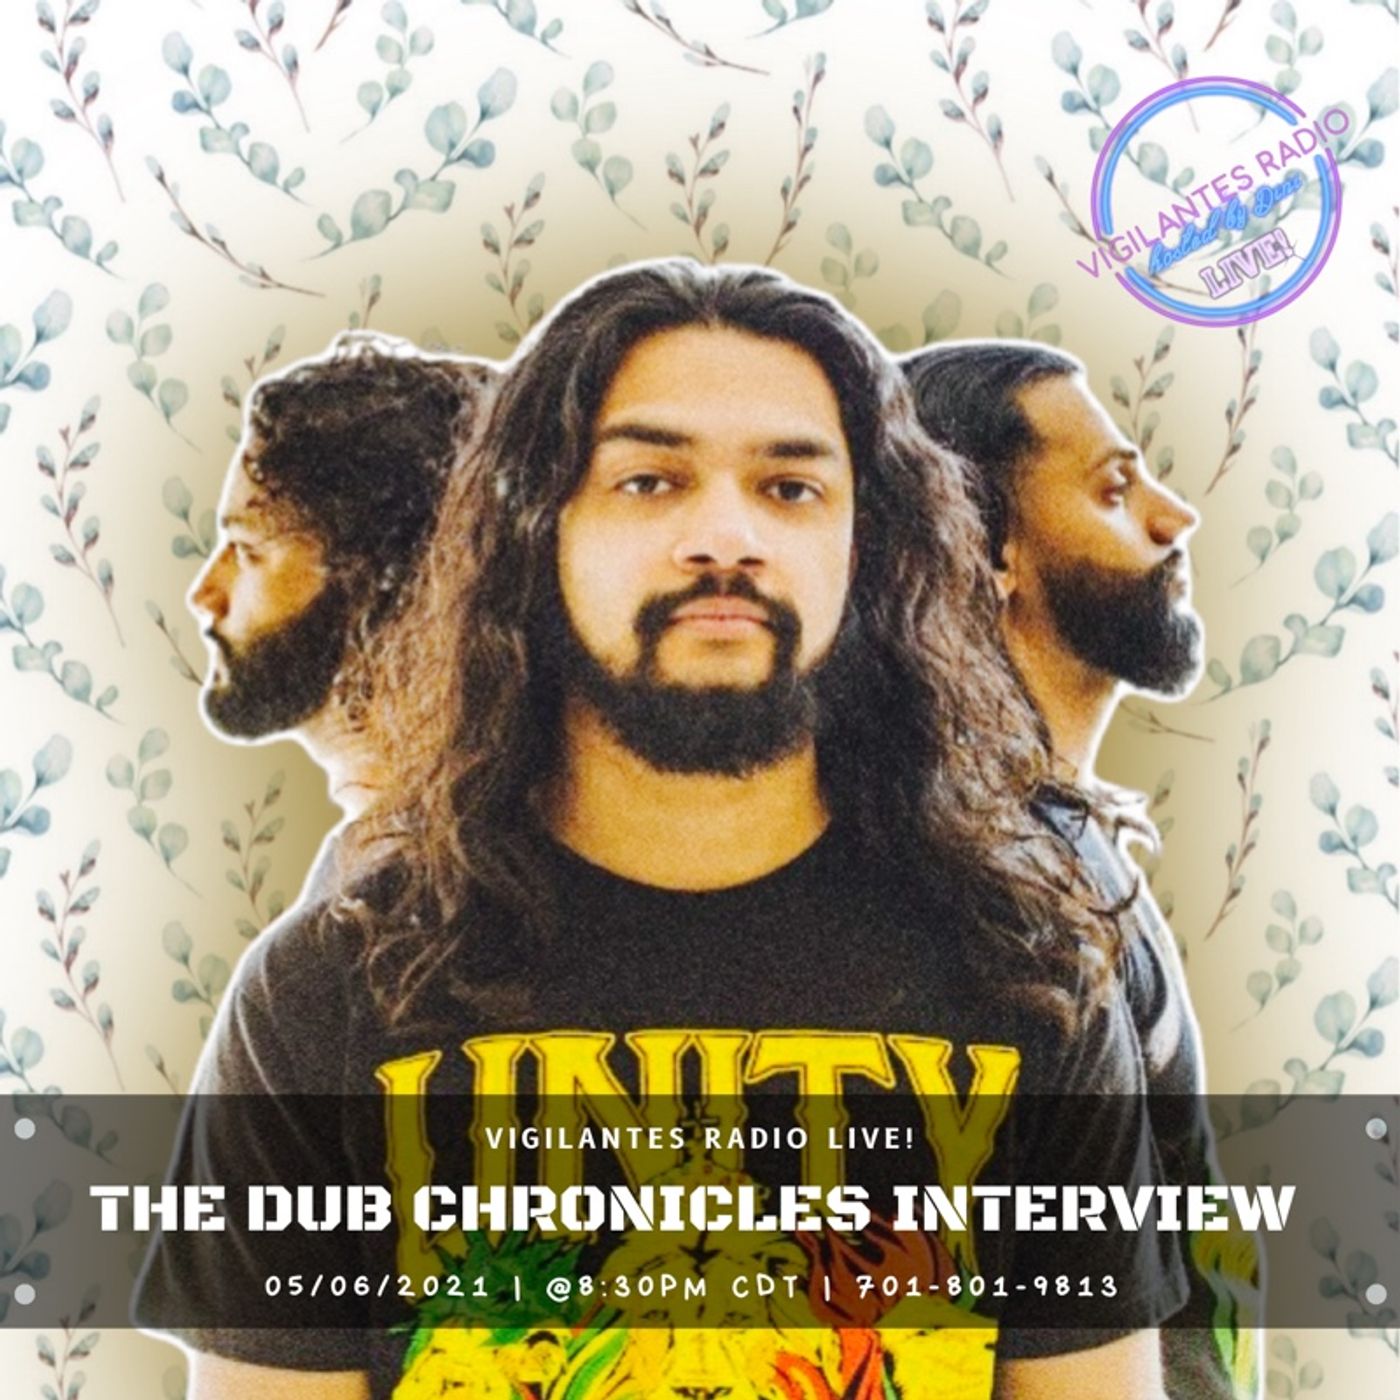 The Dub Chronicles Interview. Image